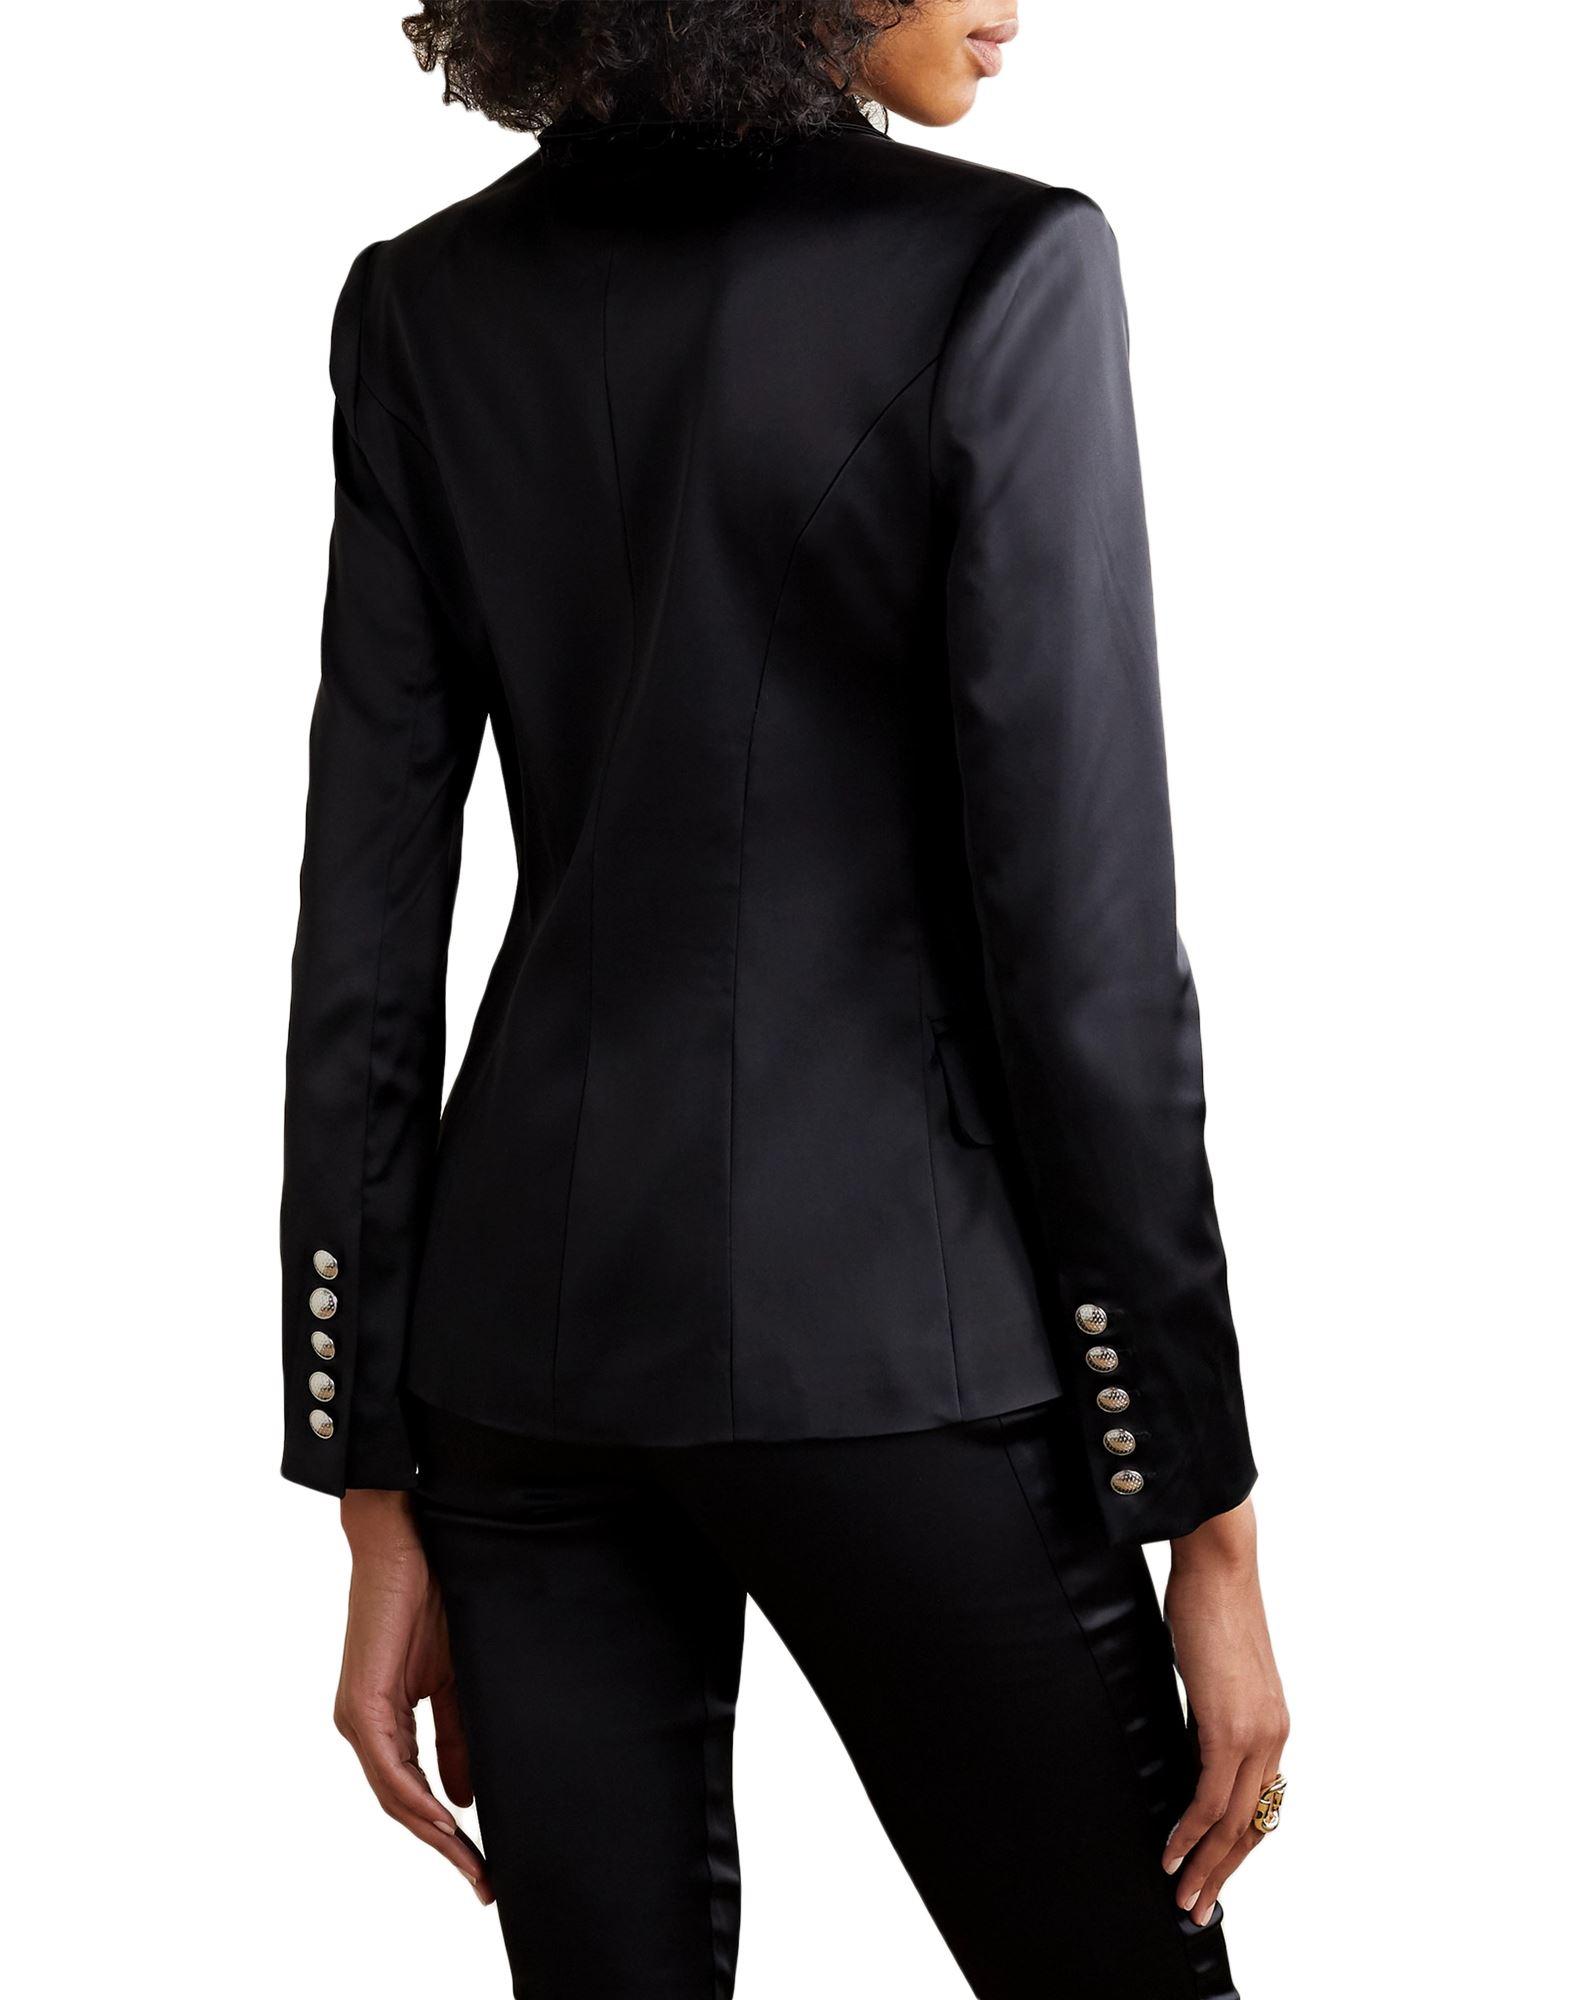 L'Agence Satin Suit Jacket in Black - Lyst